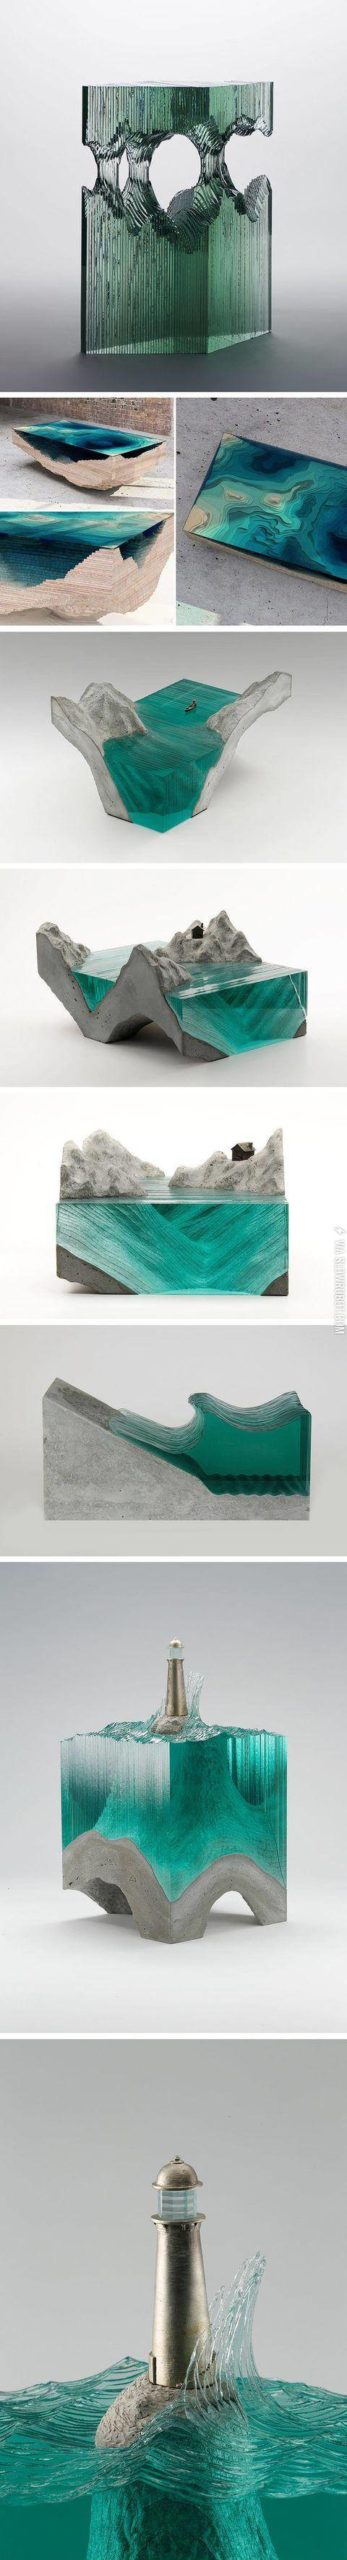 Amazing+glass+layered+sculptures